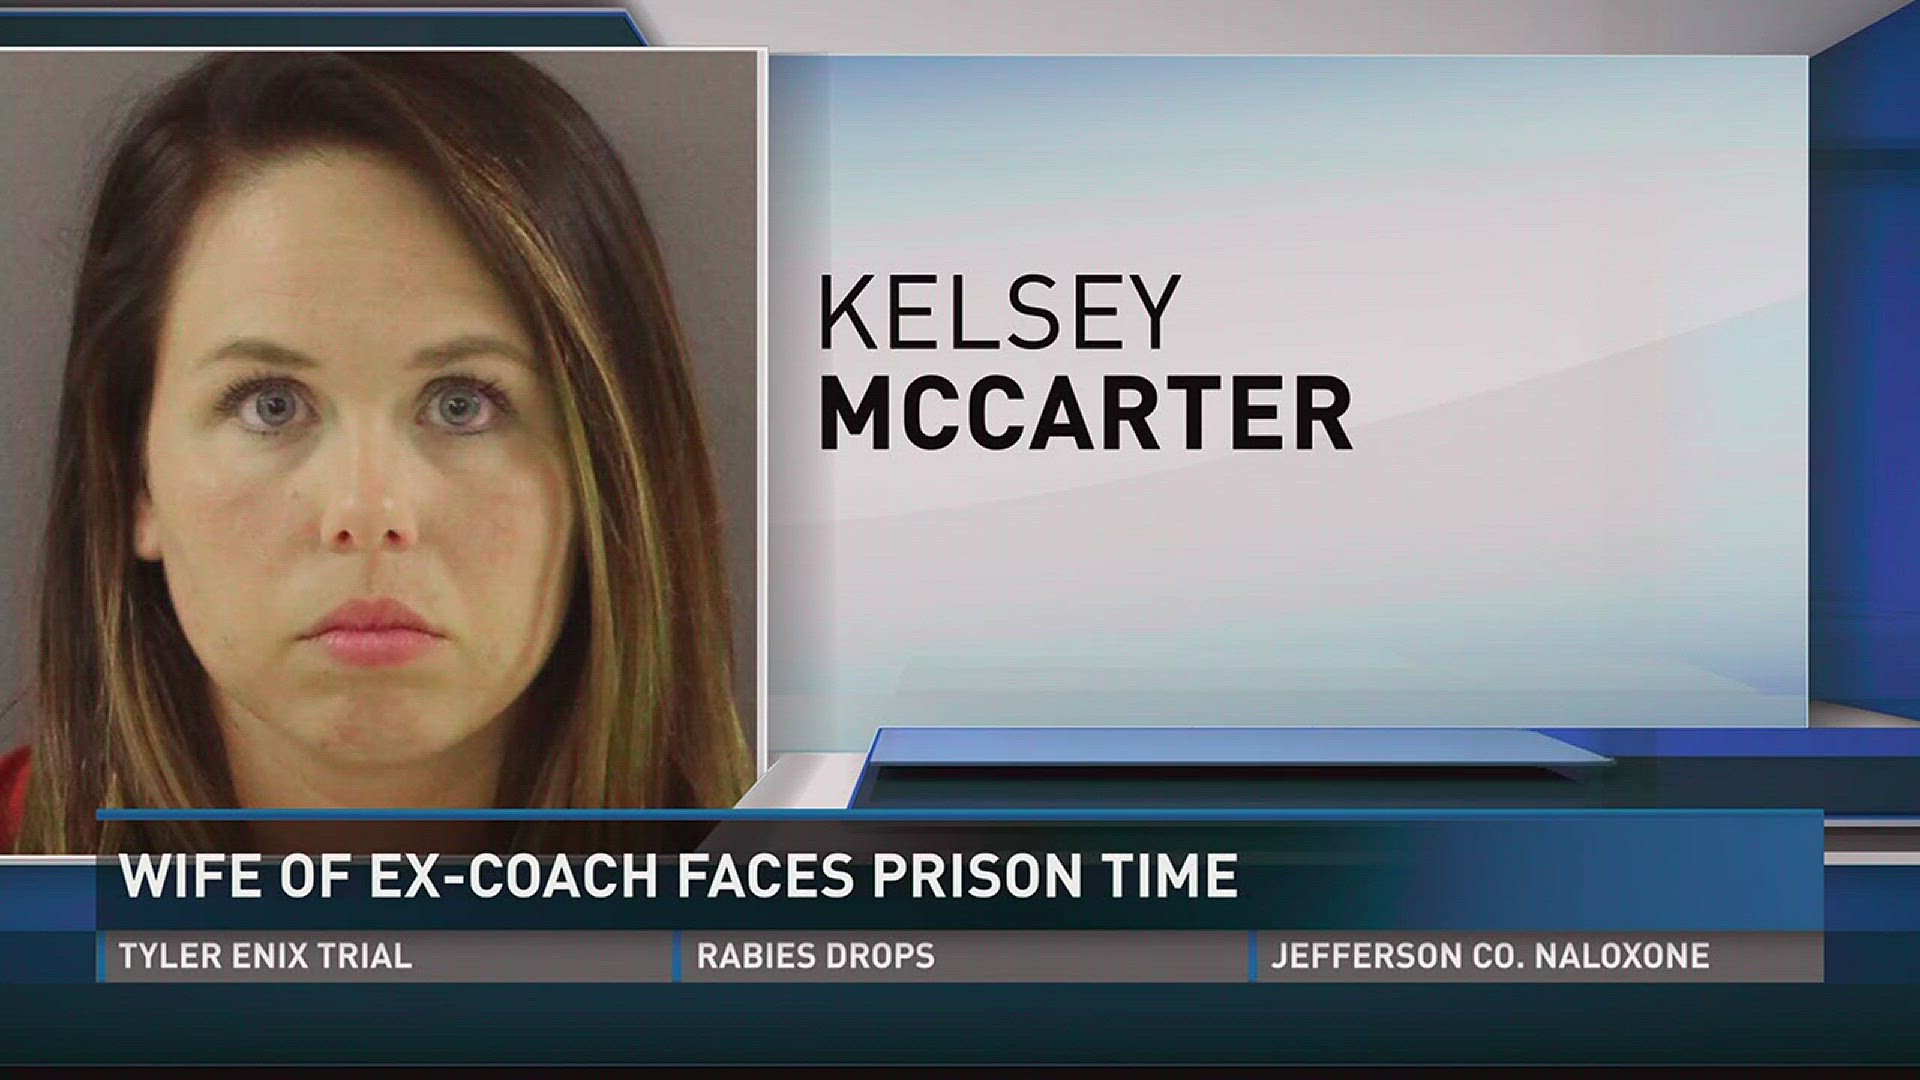 Sept. 25, 2017: The wife of a former Knox County assistant high school football coach faces a three-year prison sentence for having sex with a student.